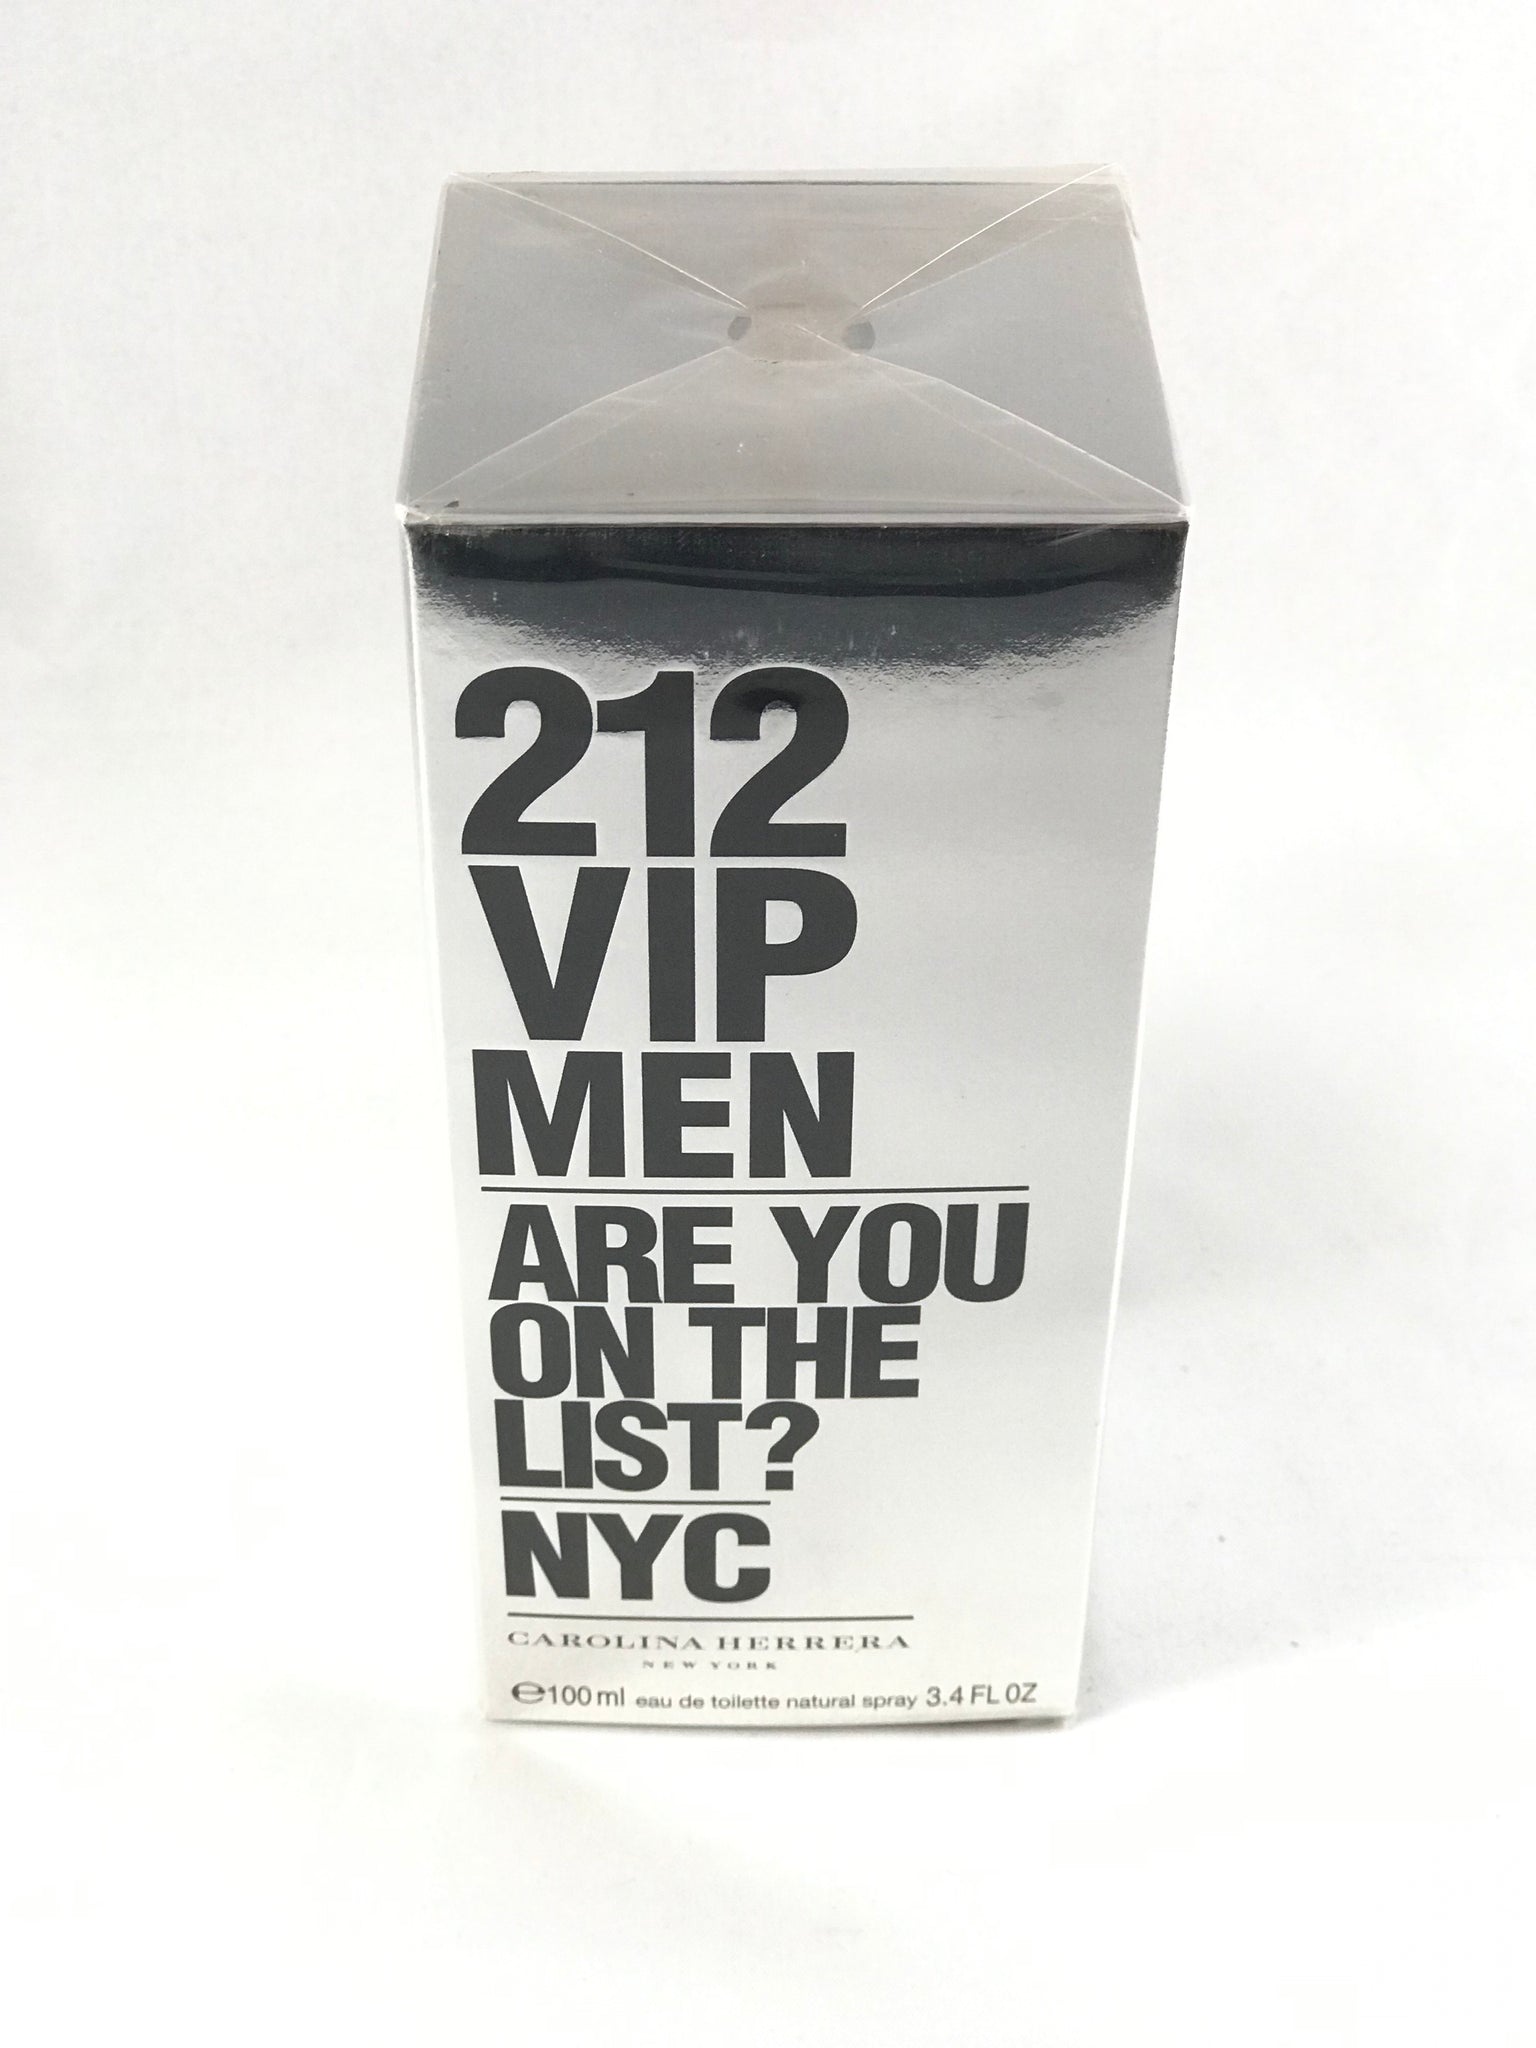 212 vip men are you on the list ? nyc Carolina Herrera EDT 3.4oz – always  special perfumes & gifts